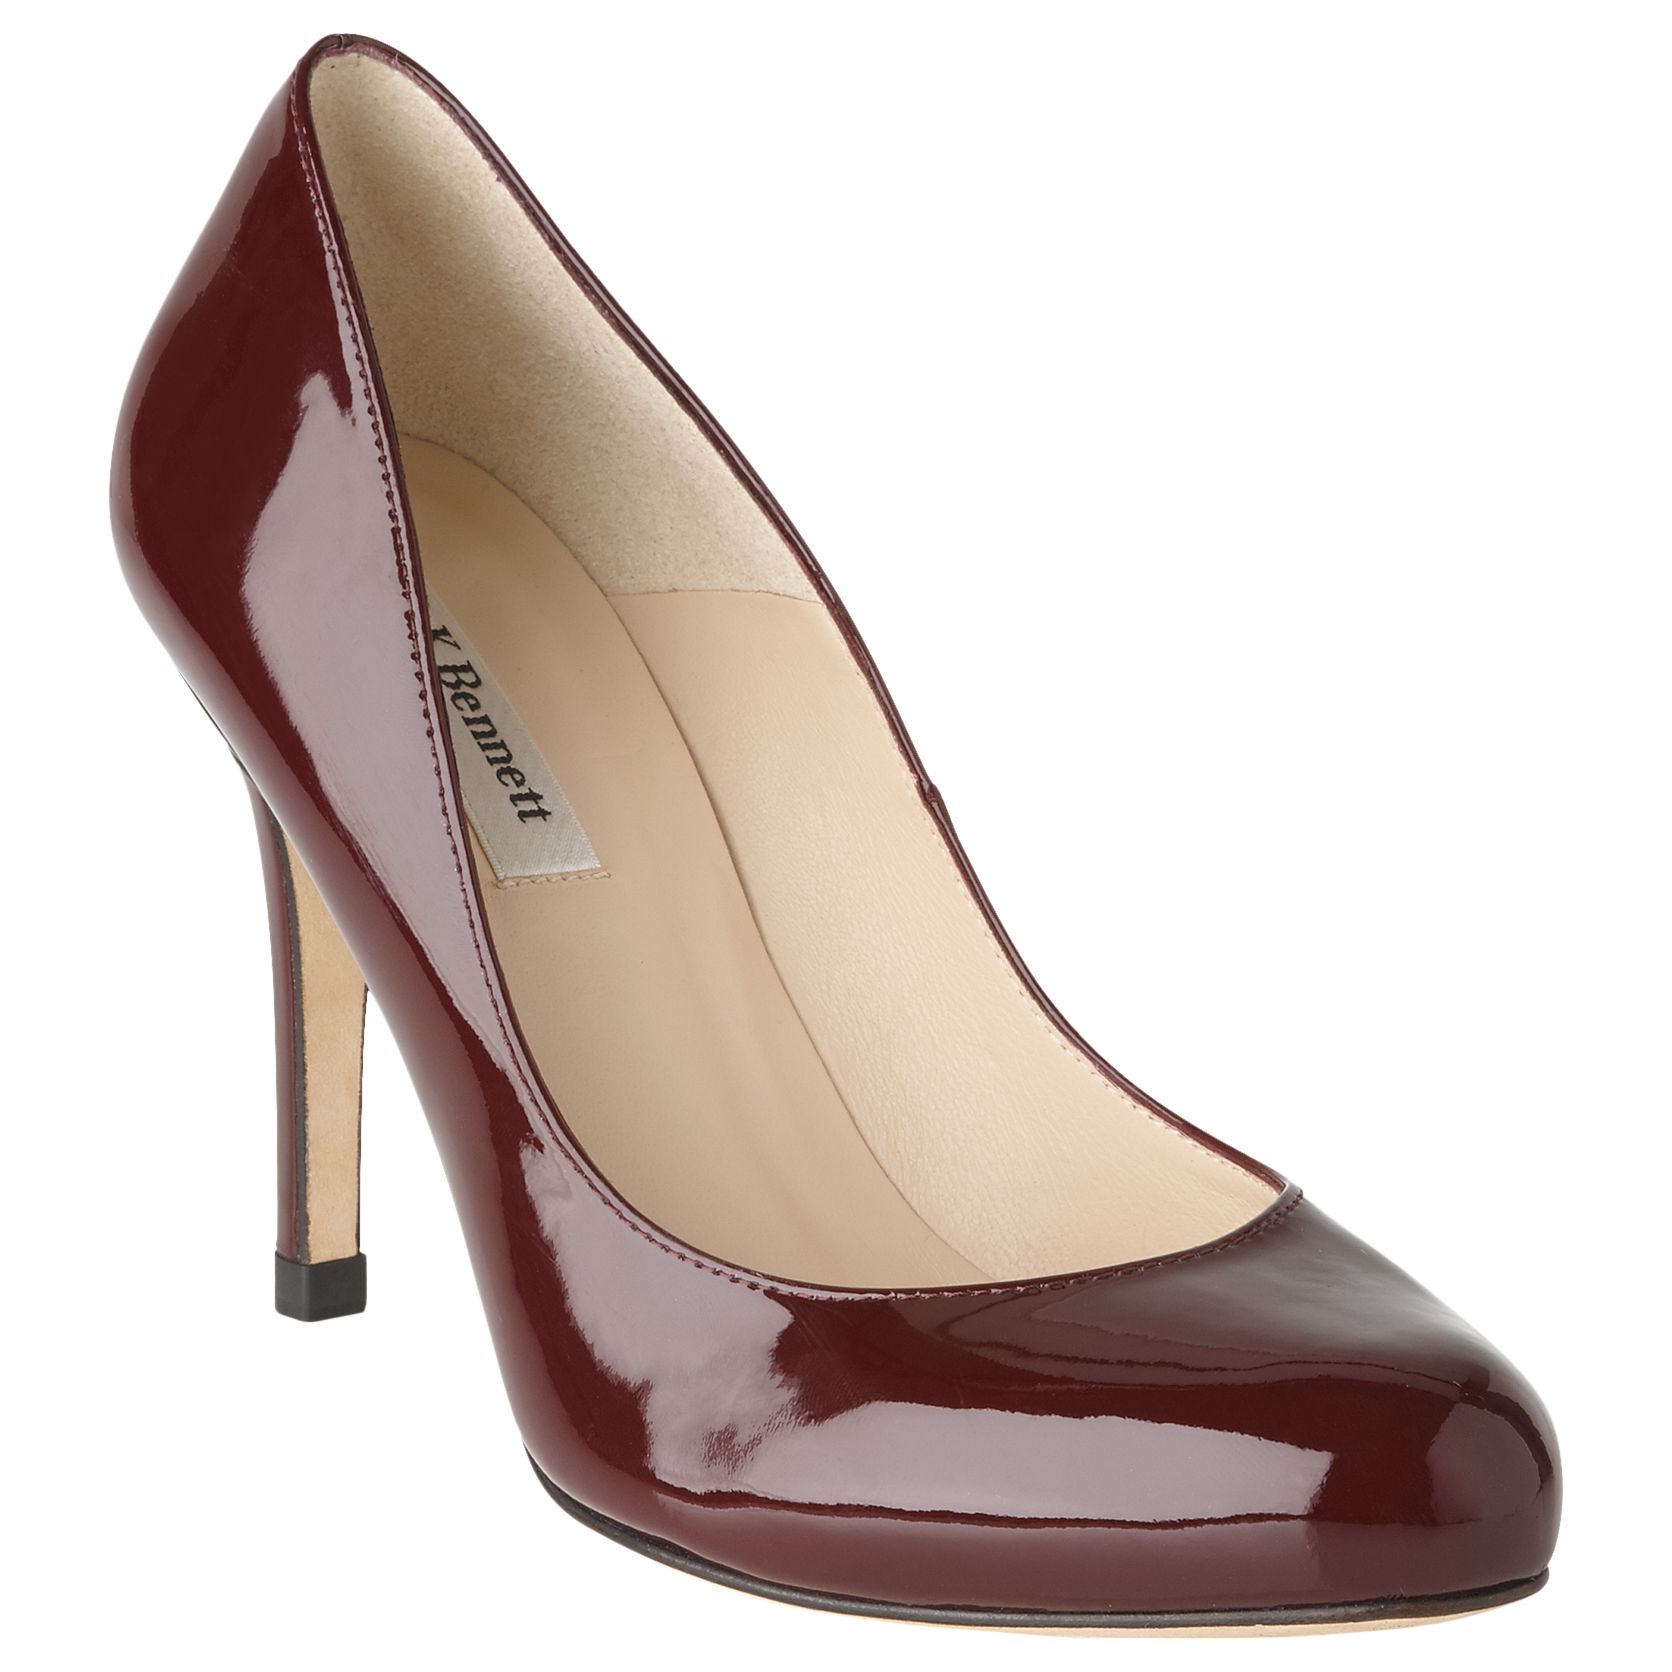 L.K. Bennett Stila Patent Leather Court Shoes, Oxford Red Patent at John Lewis & Partners